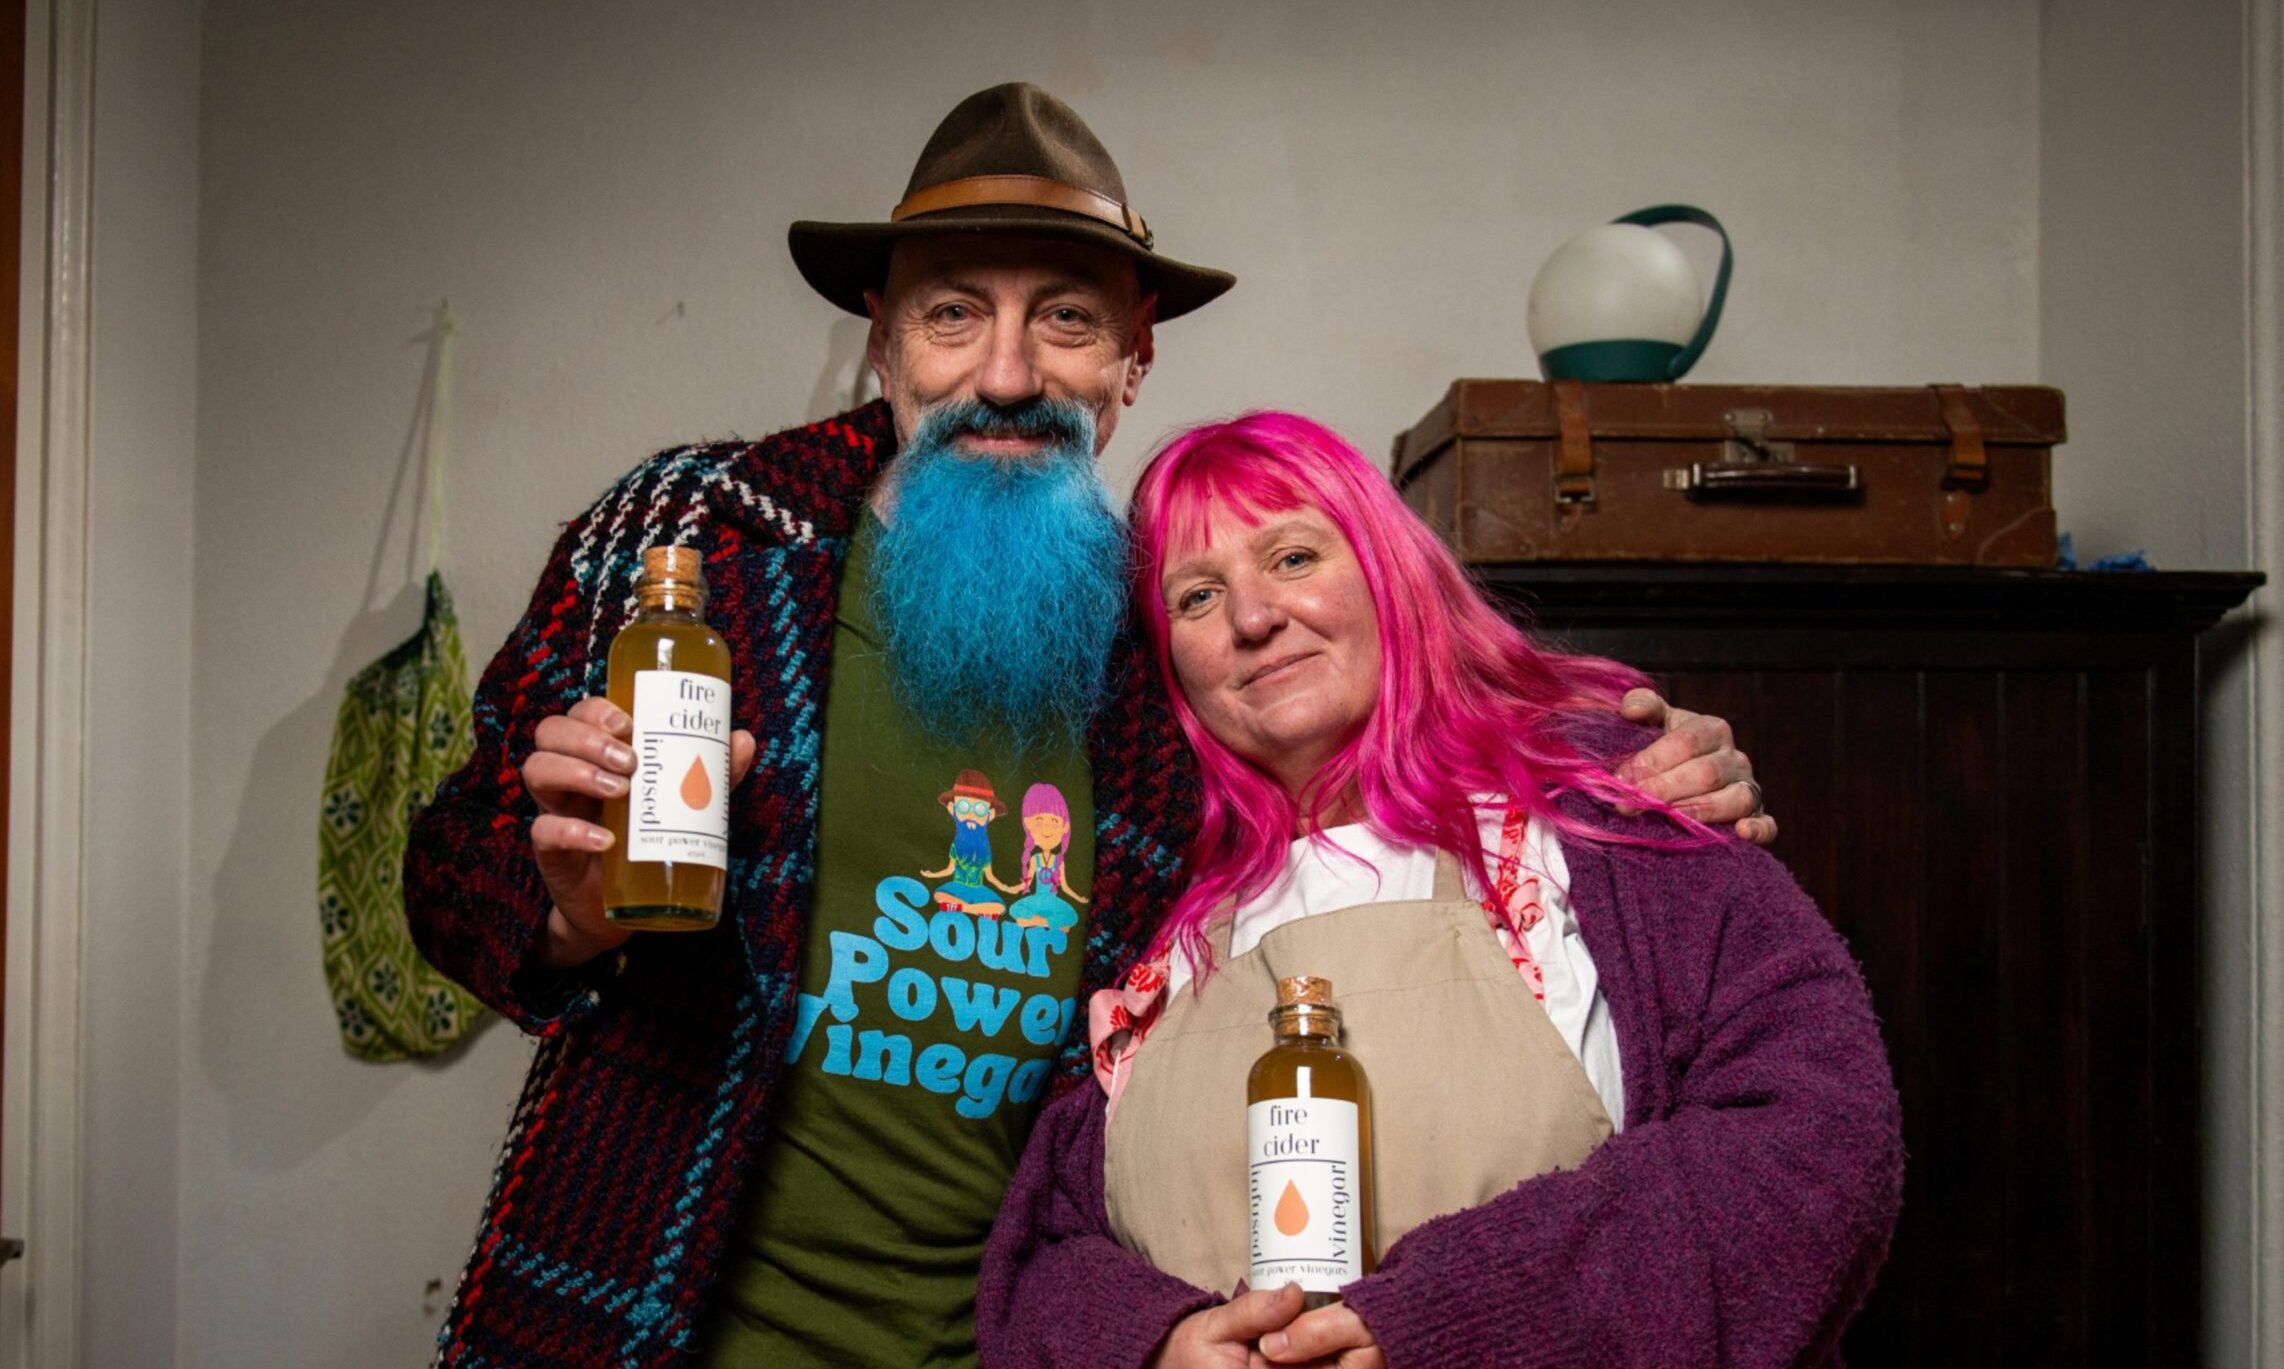 Sour Power Vinegars has launched their first product, fire cider, from the minds of Kirriemuir couple Nikcy and Alan Knox. Image: Kim Cessford / DC Thomson